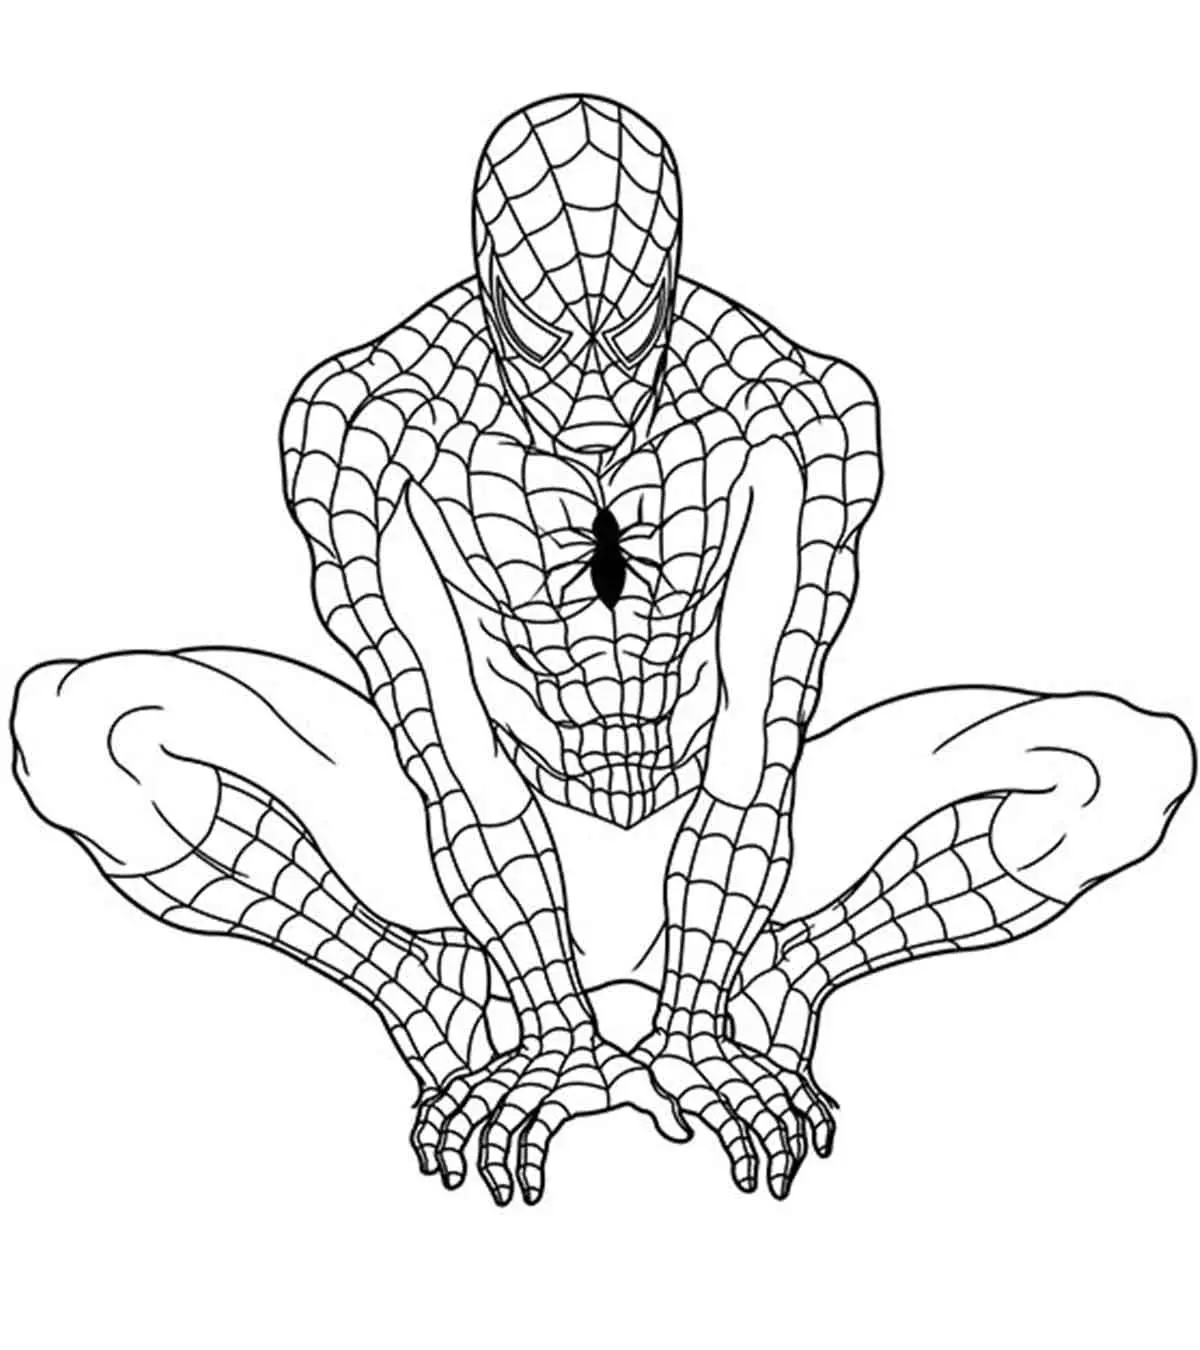 Top 20 Superhero Coloring Pages For Your Little Ones